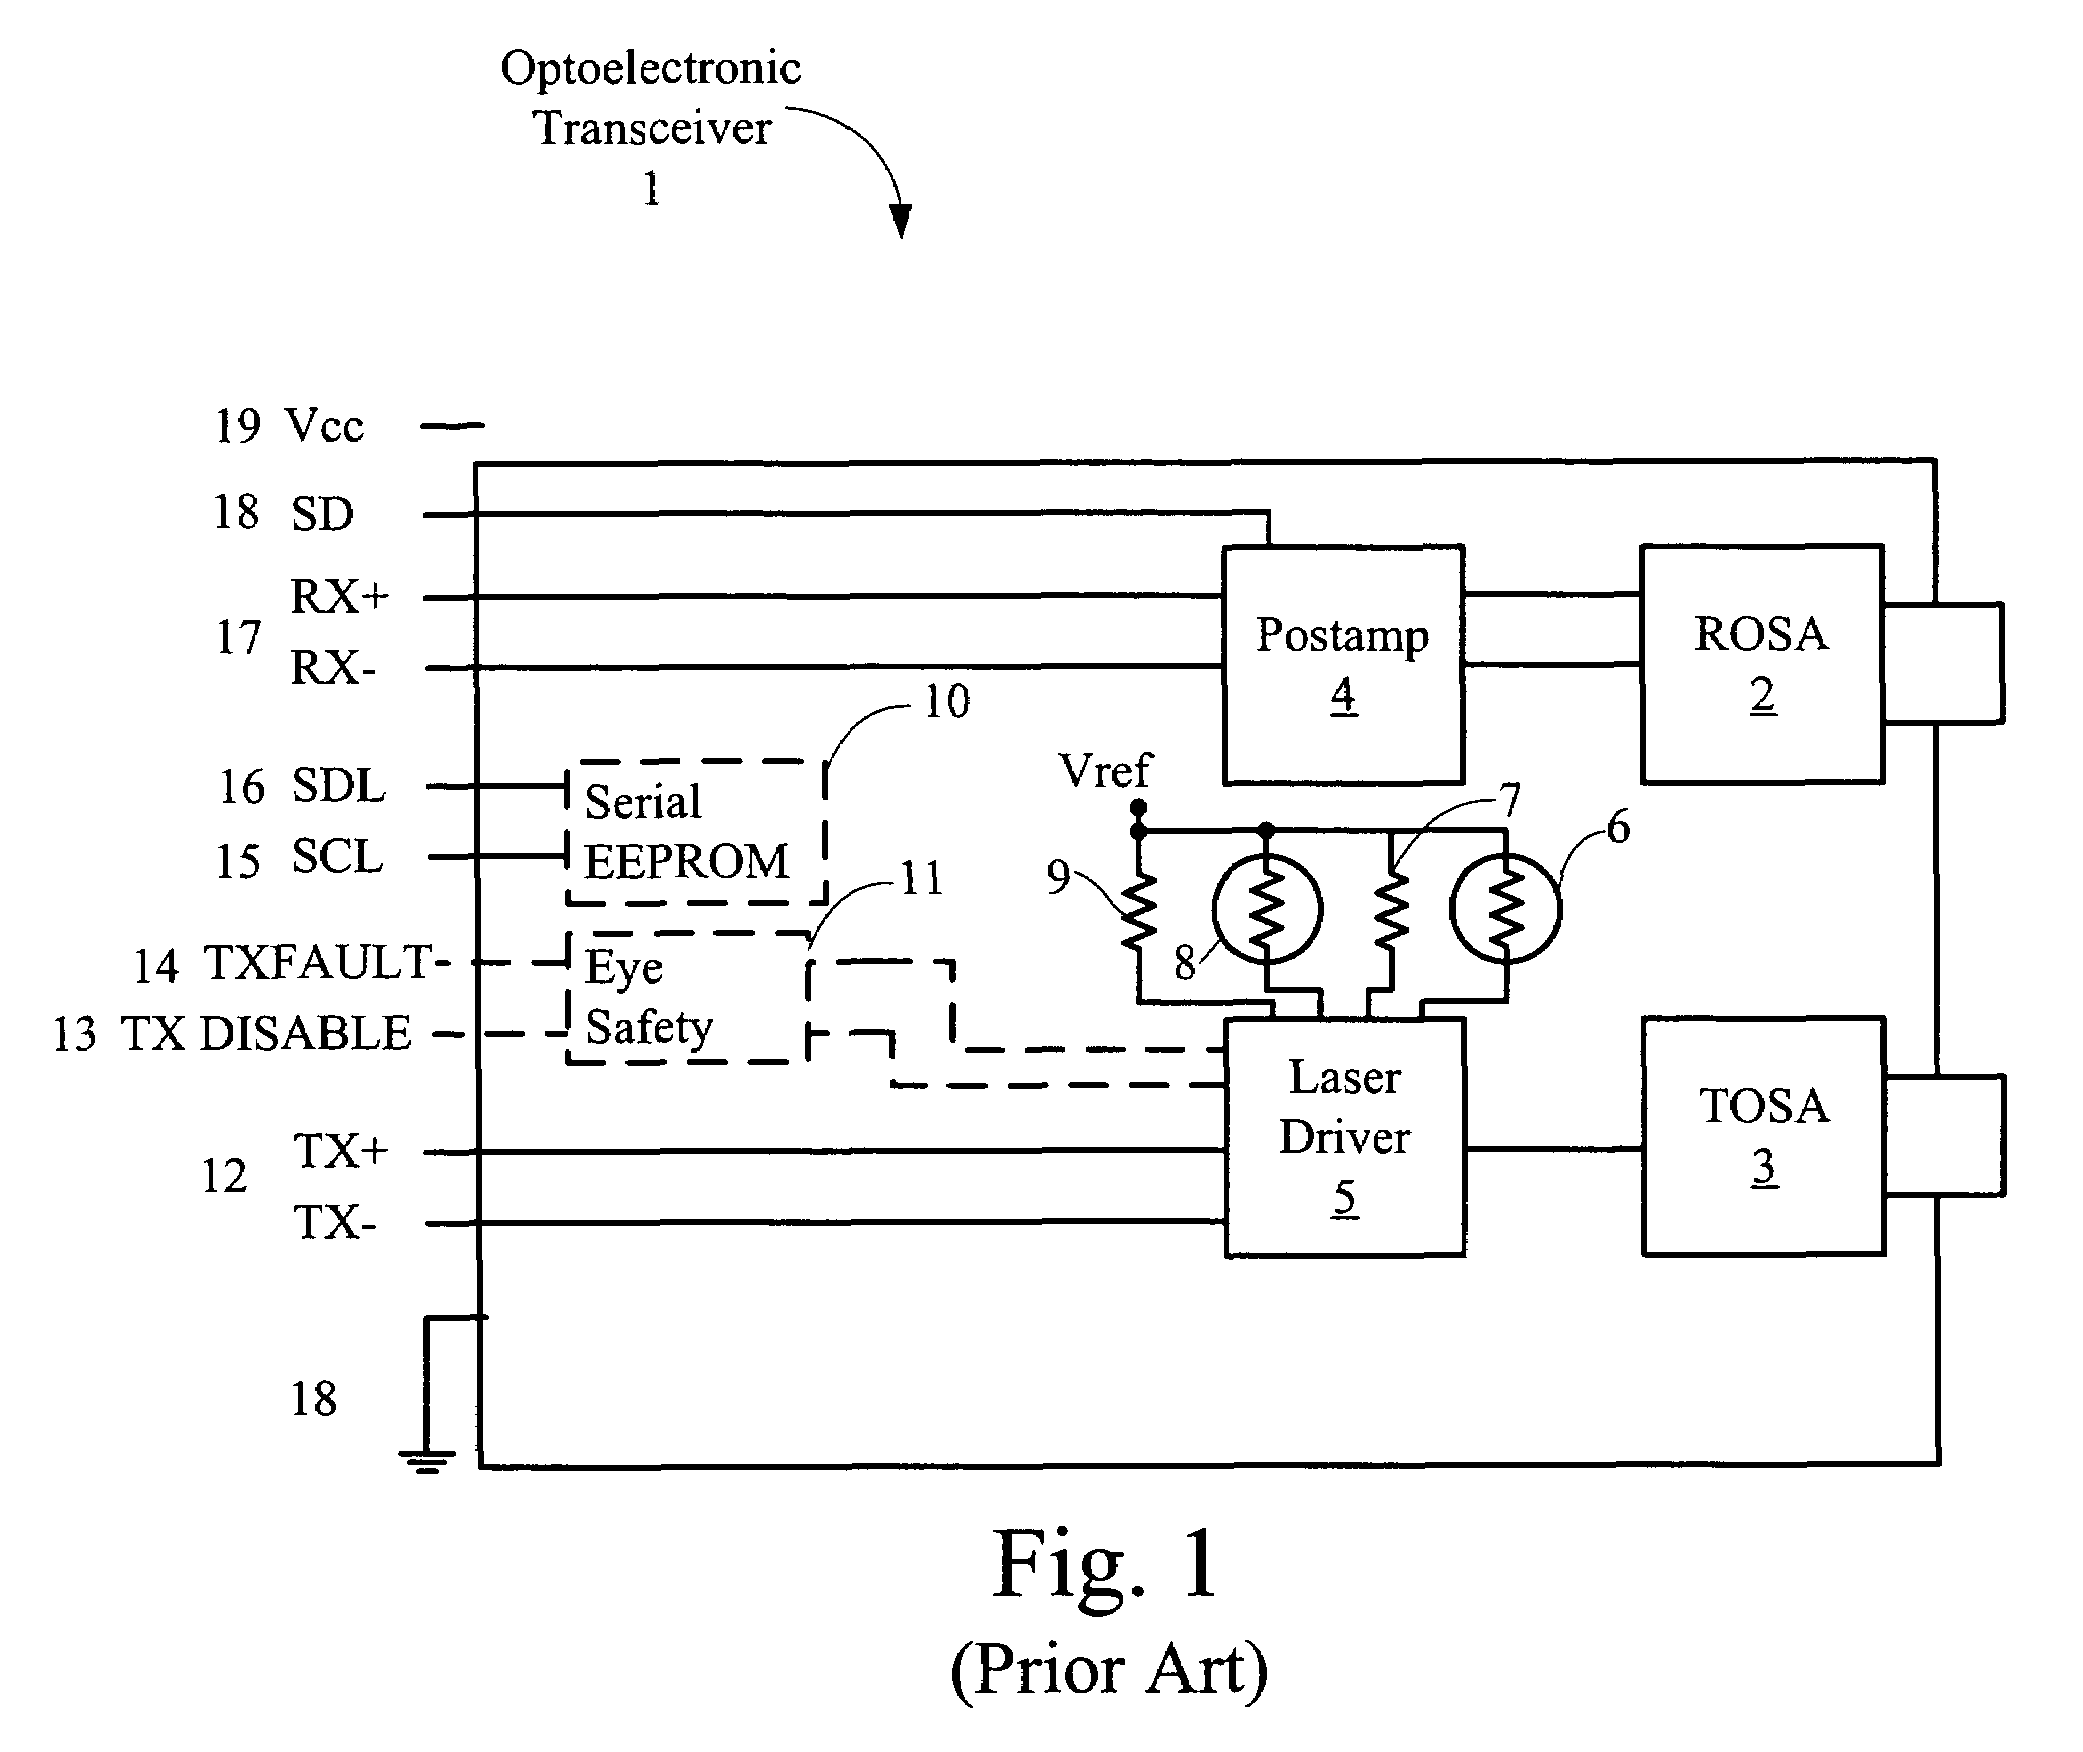 Analog to digital signal conditioning in optoelectronic transceivers